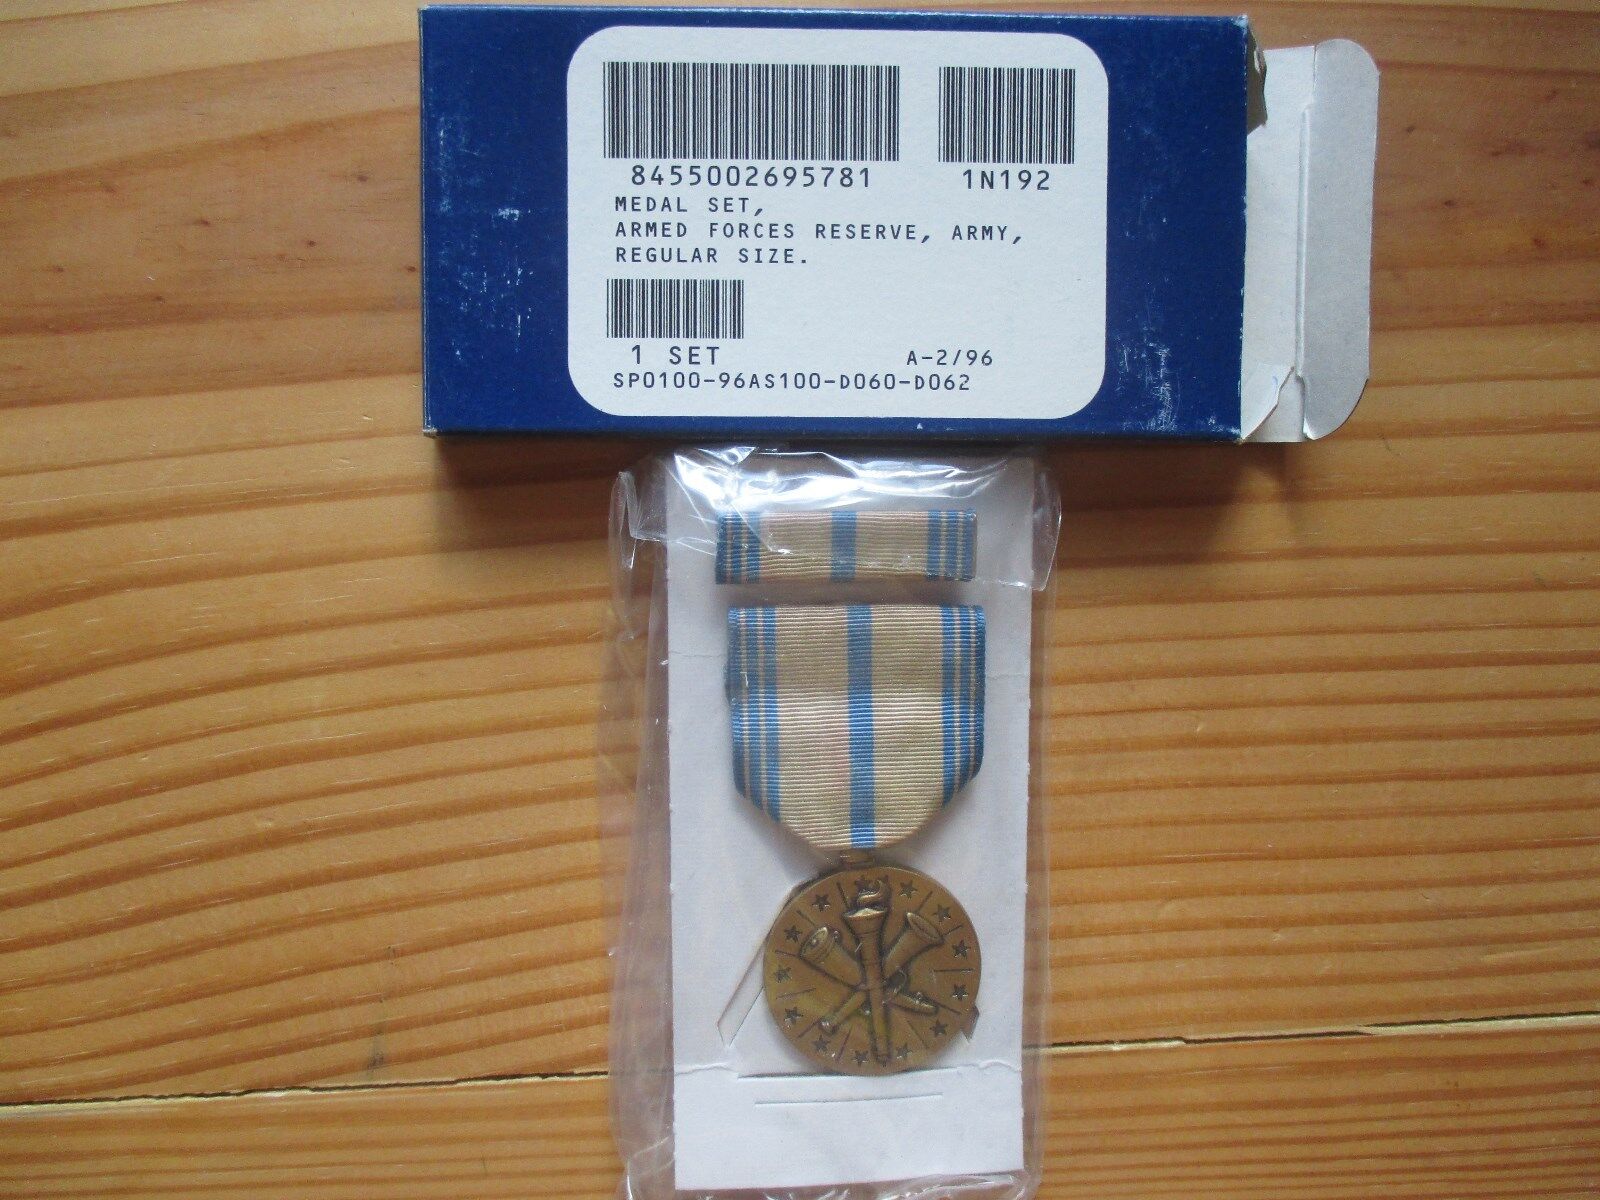 Medal set, Armed Forces Reserve with ribbon New in box. awarded for 10 yrs serv